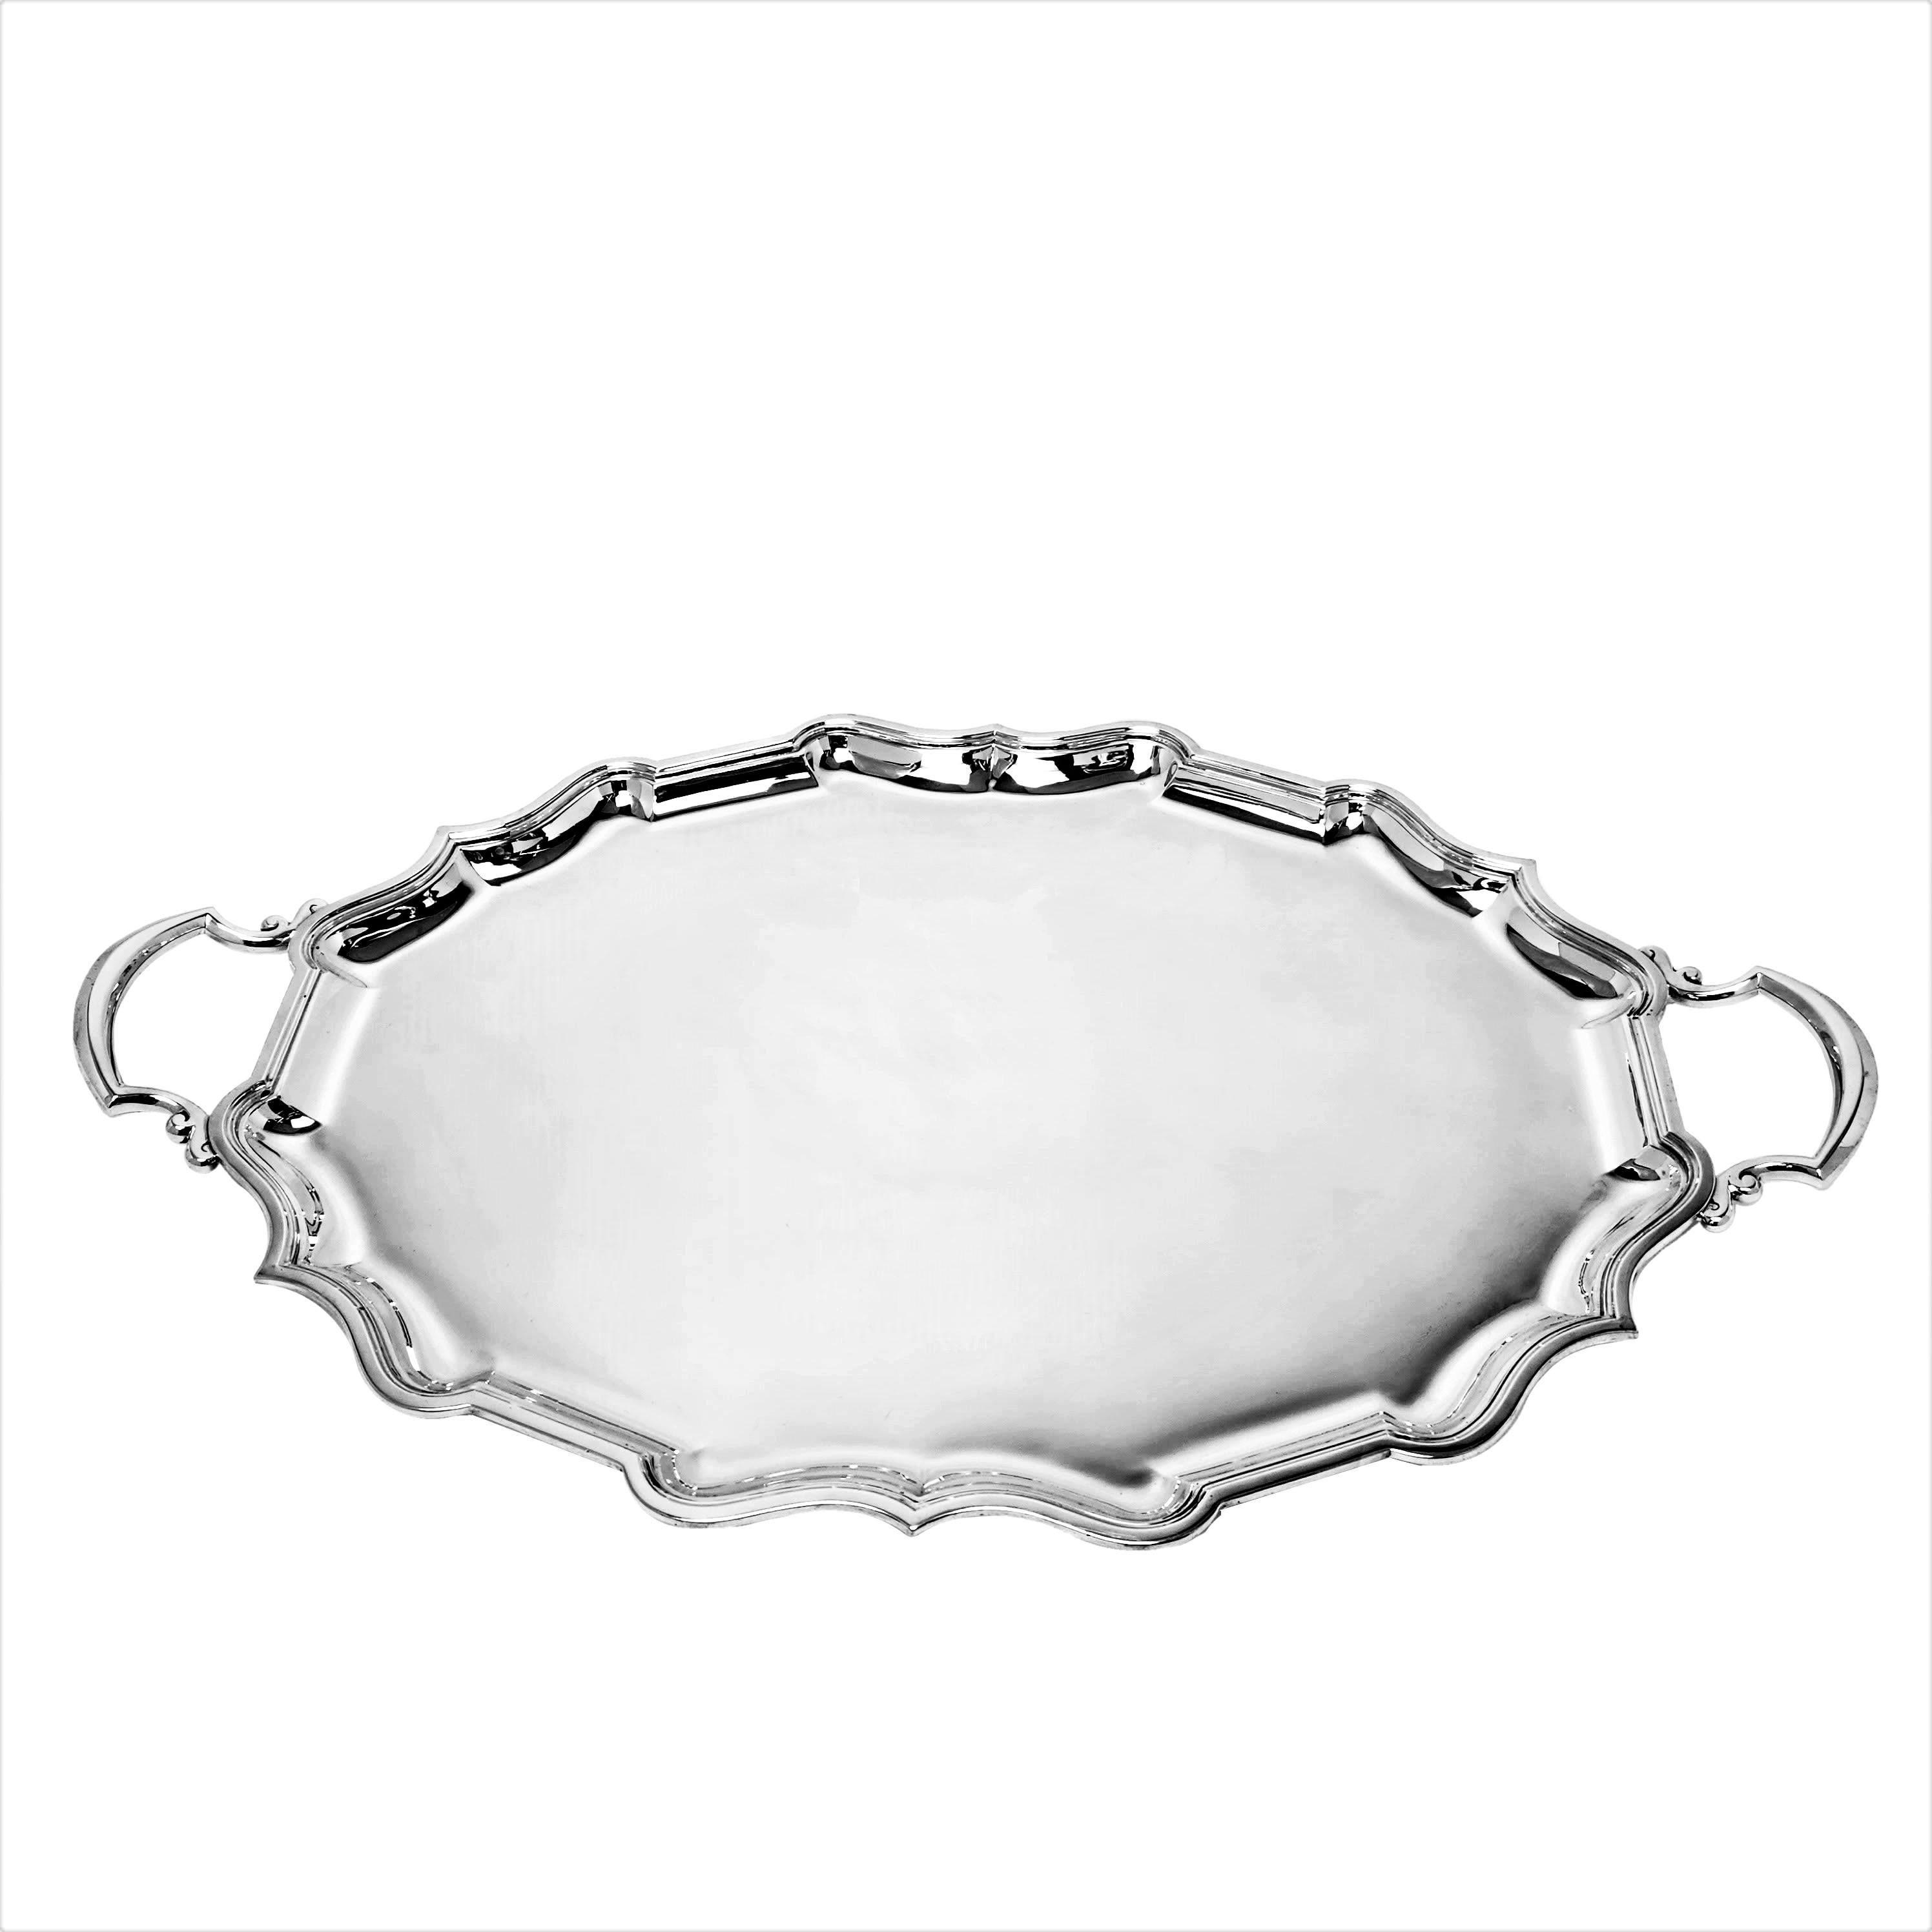 A large Sterling Silver two handled serving Tray with a traditional bath border. The Tea Tray is suitable for a substantial tea set and is an ideal serving tray.

Made in Sheffield, England in 1915 by Elkington & Co.

Approx. Weight - 2862g /